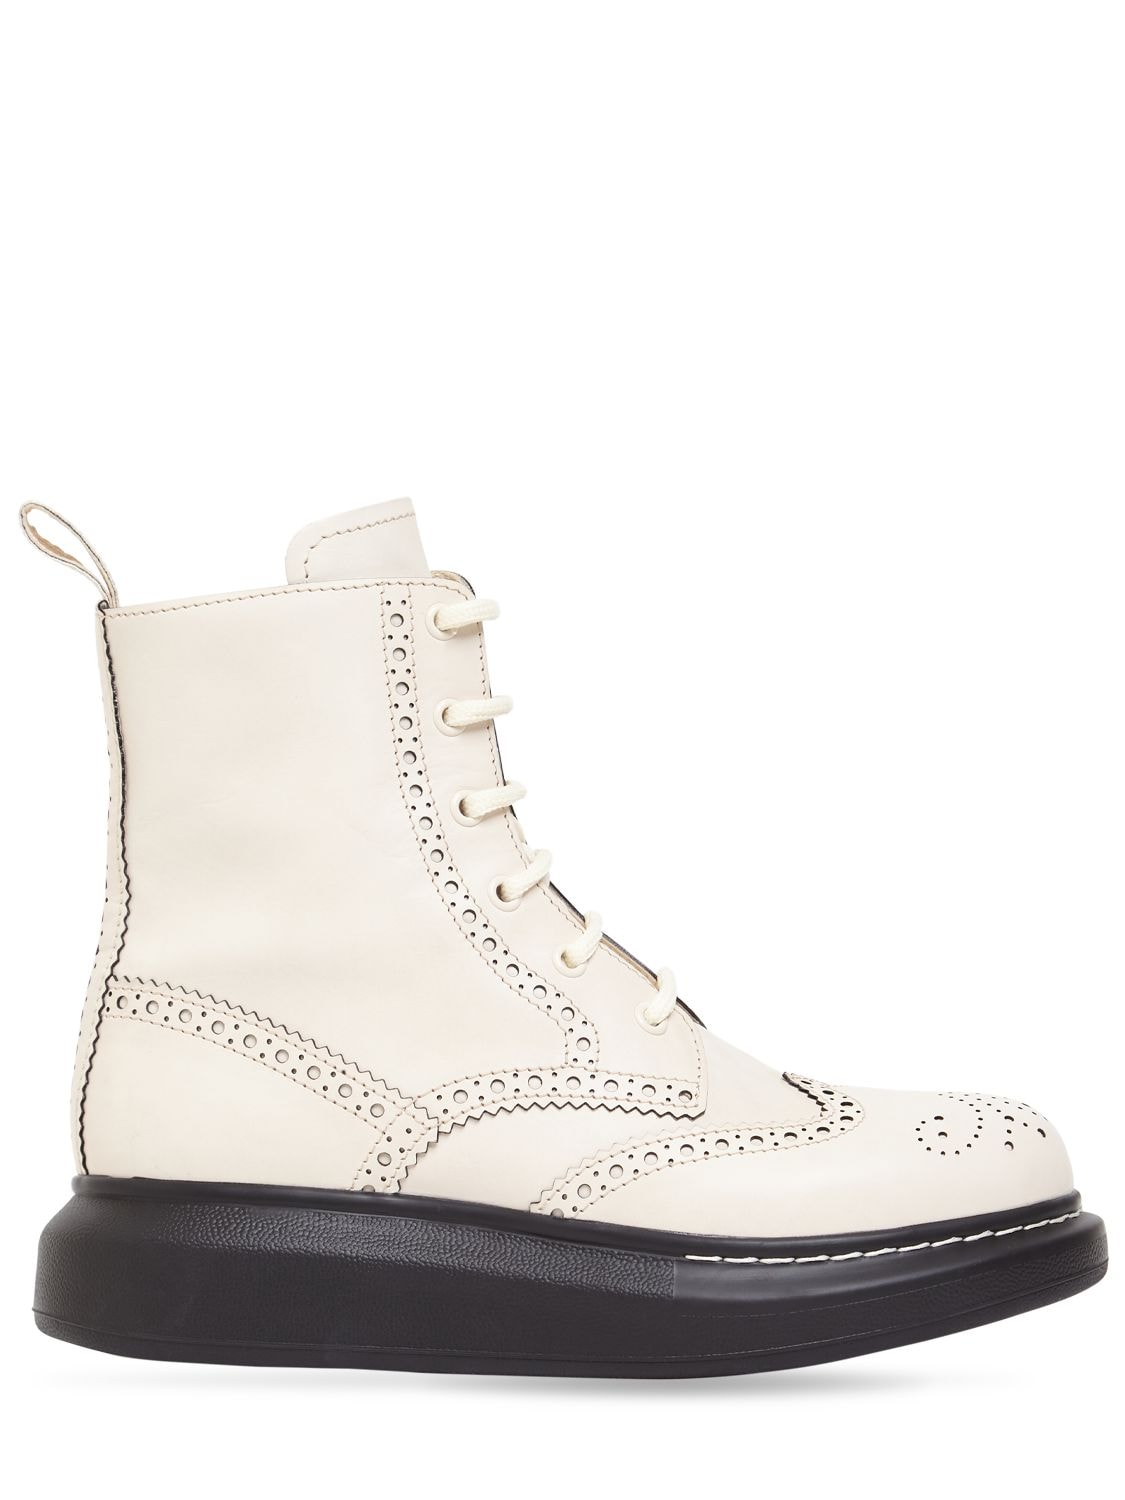 cream lace up boots